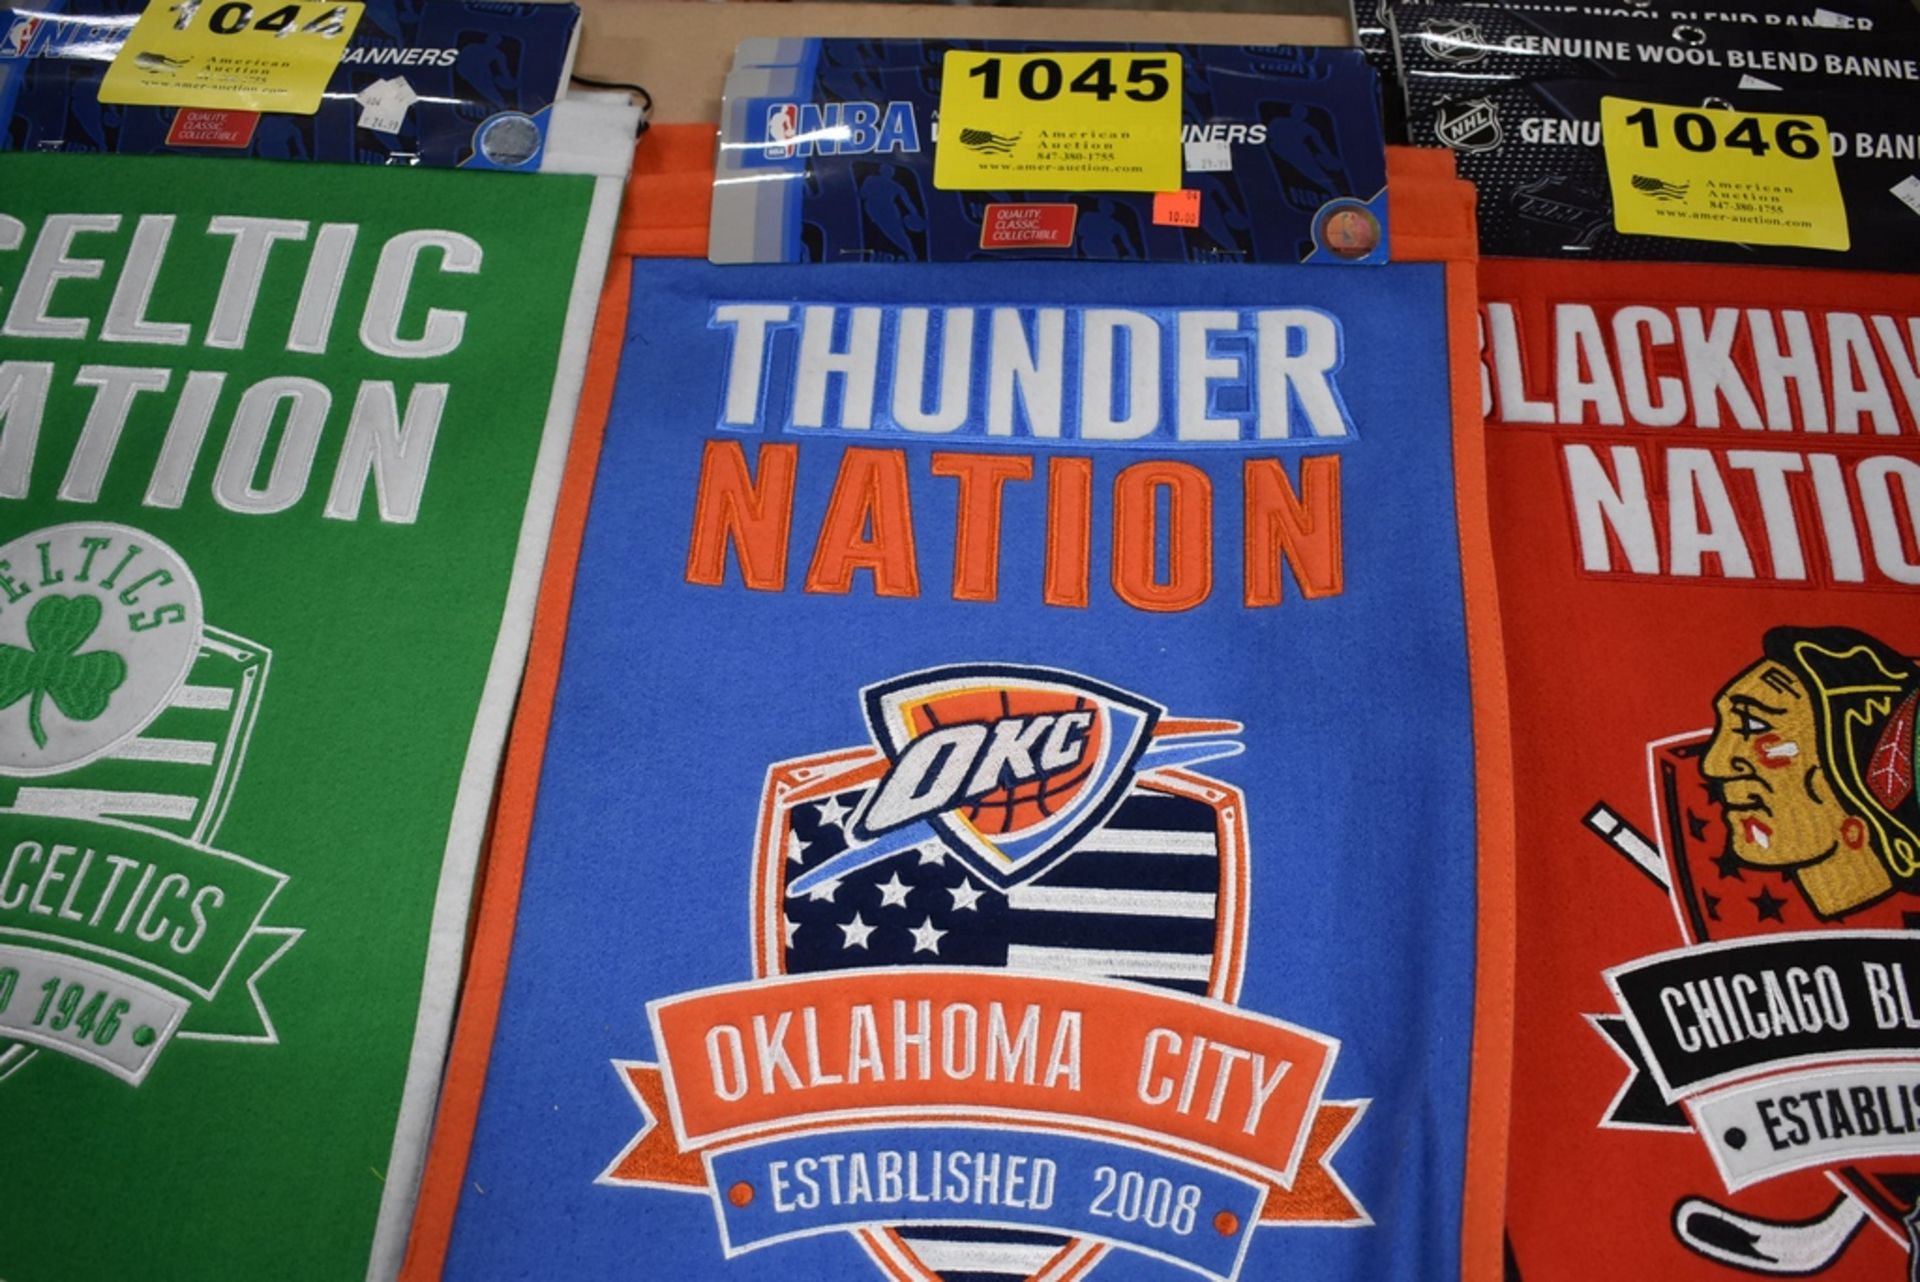 (2) OKLAHOMA CITY WOOL BLEND BANNERS